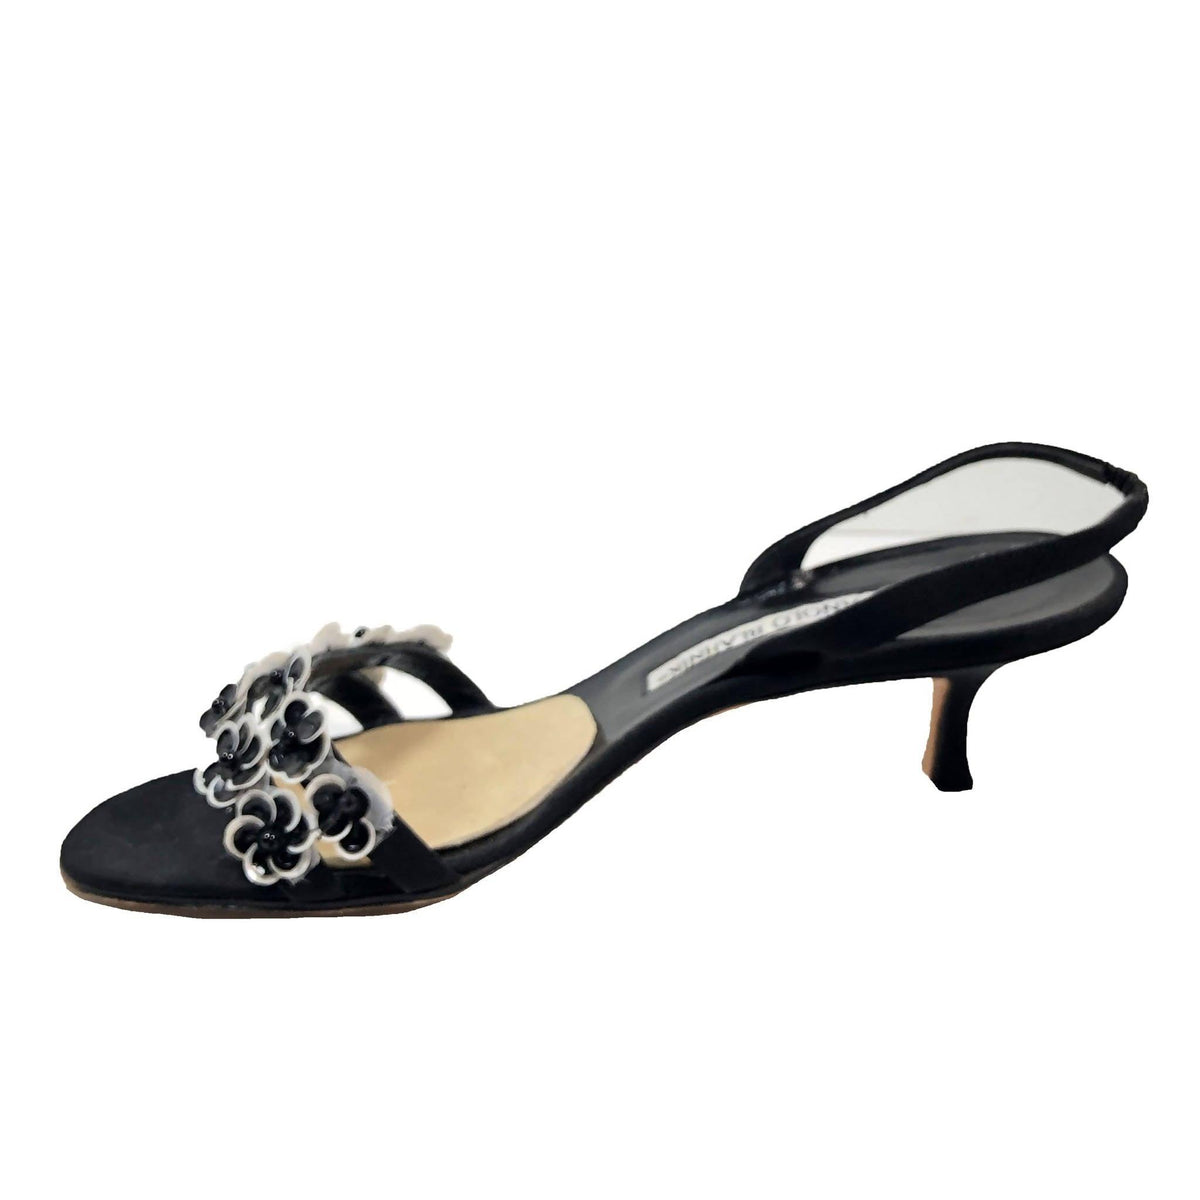 Pre-owned MANOLO BLAHNIK Black & White Slingback Heels with Floral Toe Strap | US 8 1/2 - EU 38 1/2 - theREMODA